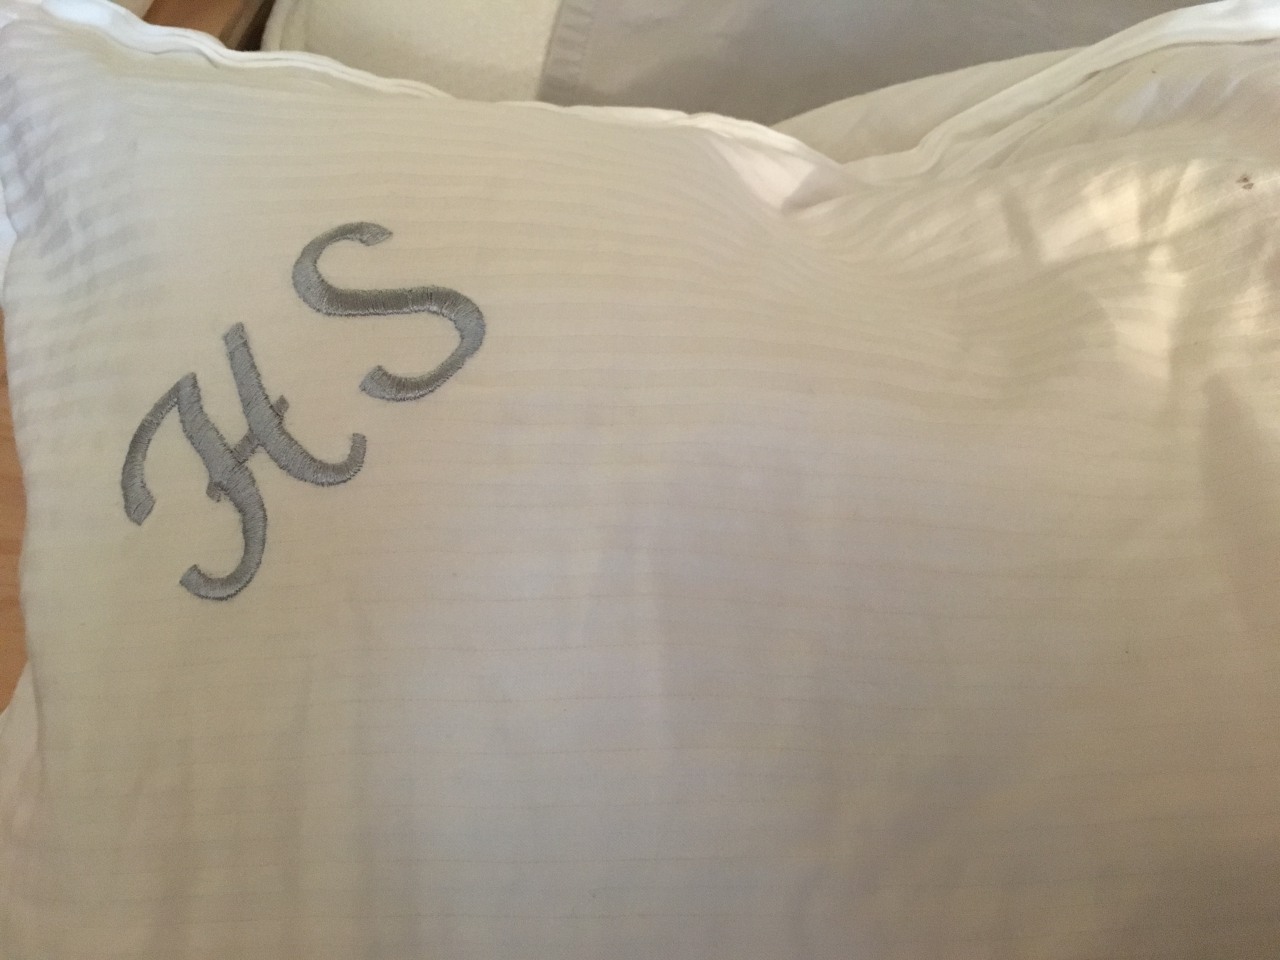 Monogrammed Pillowcases from The Peninsula Beverly Hills